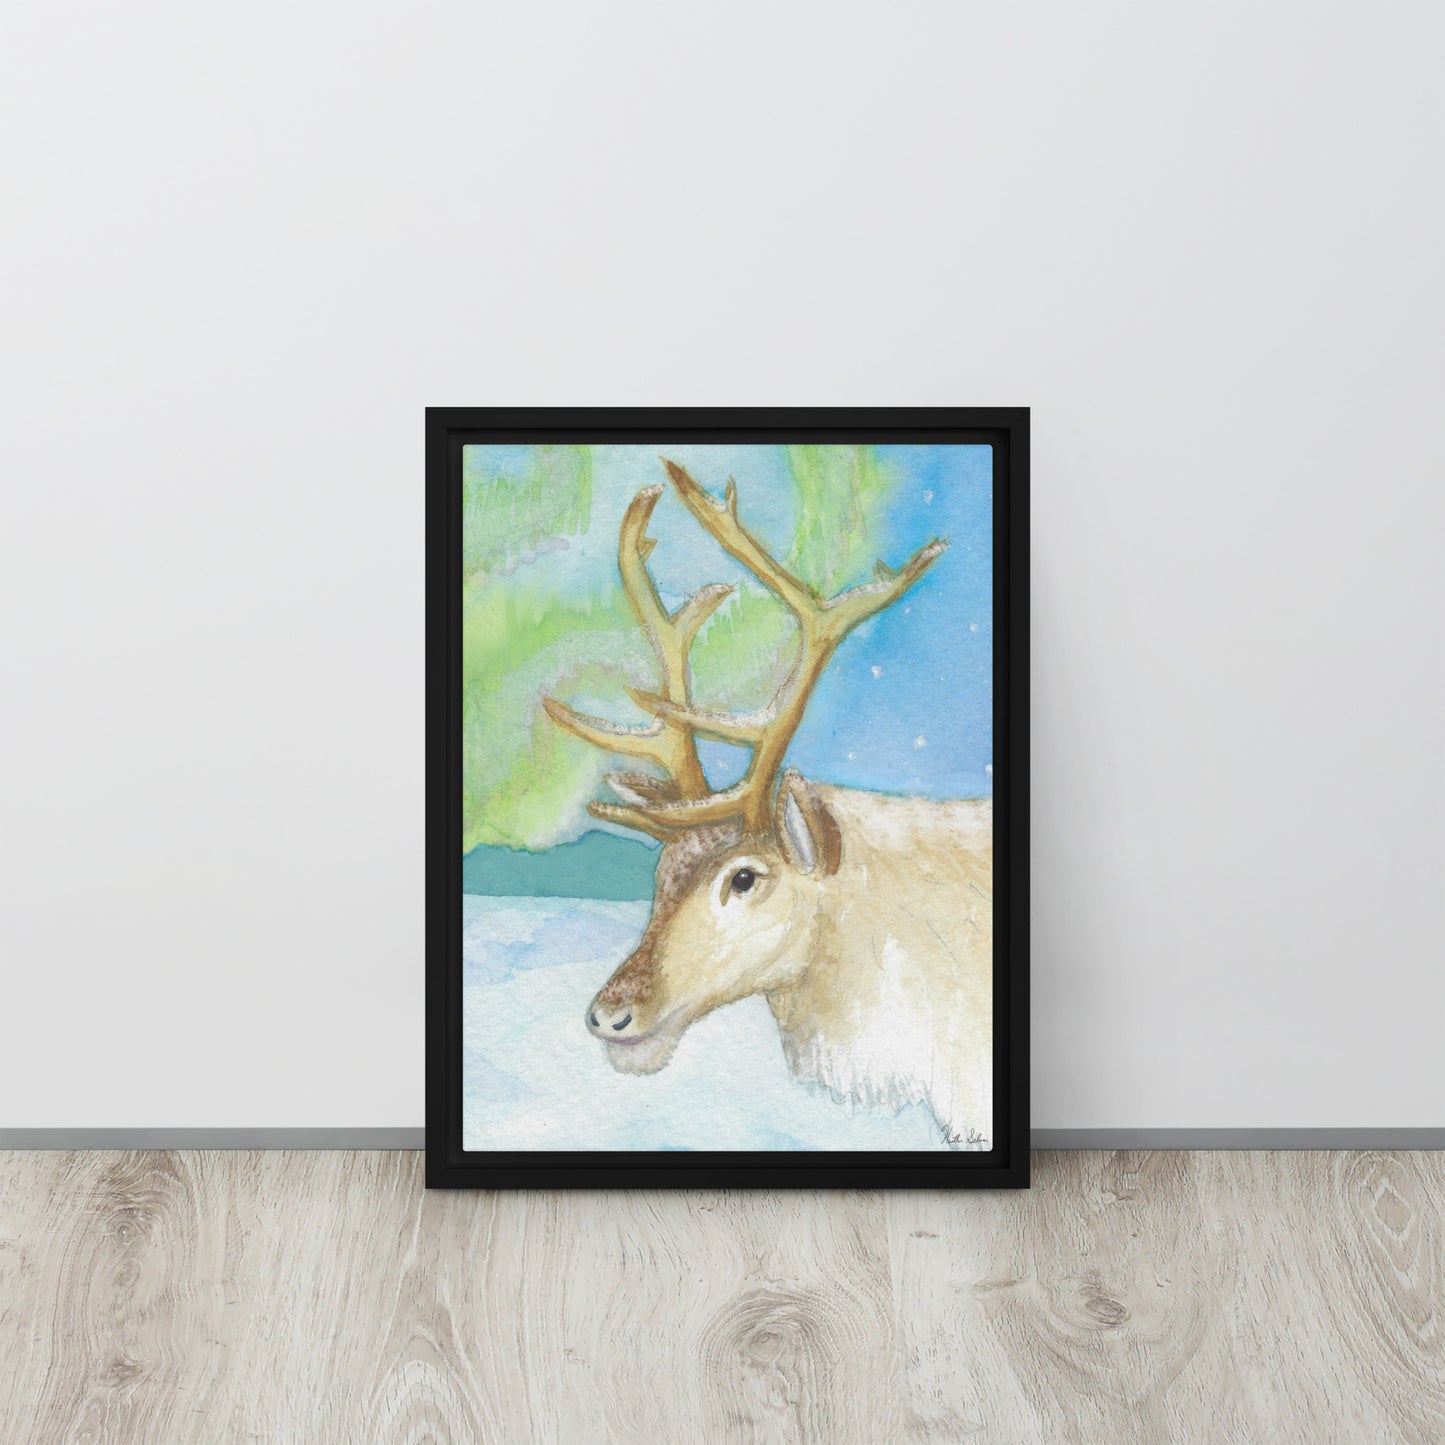 12 by 16 inch framed canvas art print of Heather Silver's Northern Lights Reindeer.  Canvas print mounted in a black pine frame. Shown leaning against wall.